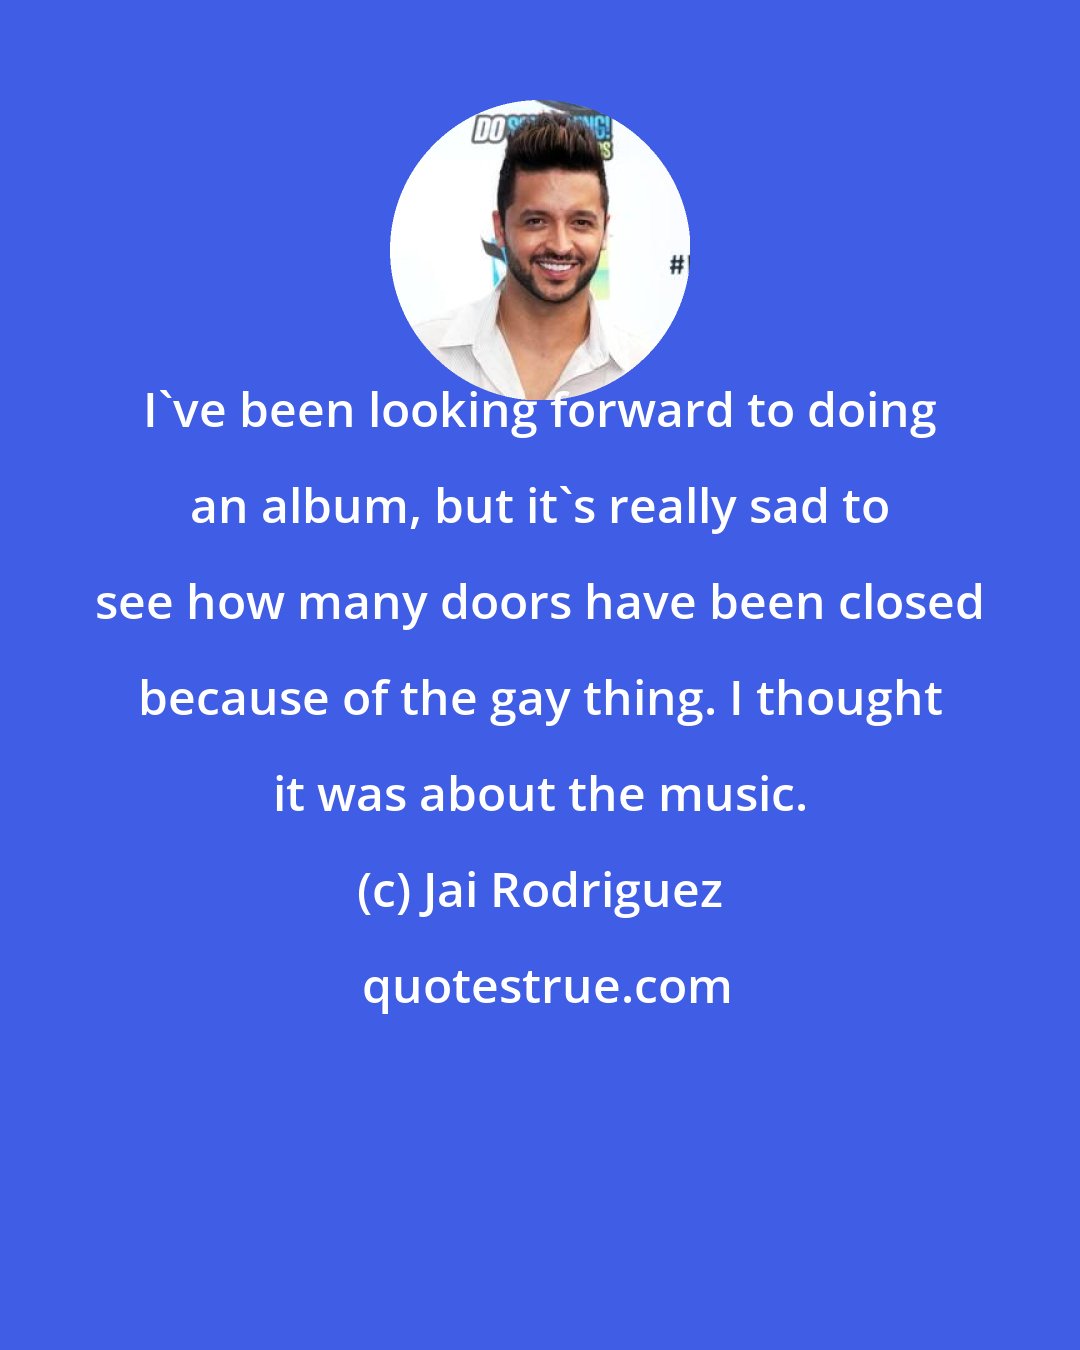 Jai Rodriguez: I've been looking forward to doing an album, but it's really sad to see how many doors have been closed because of the gay thing. I thought it was about the music.